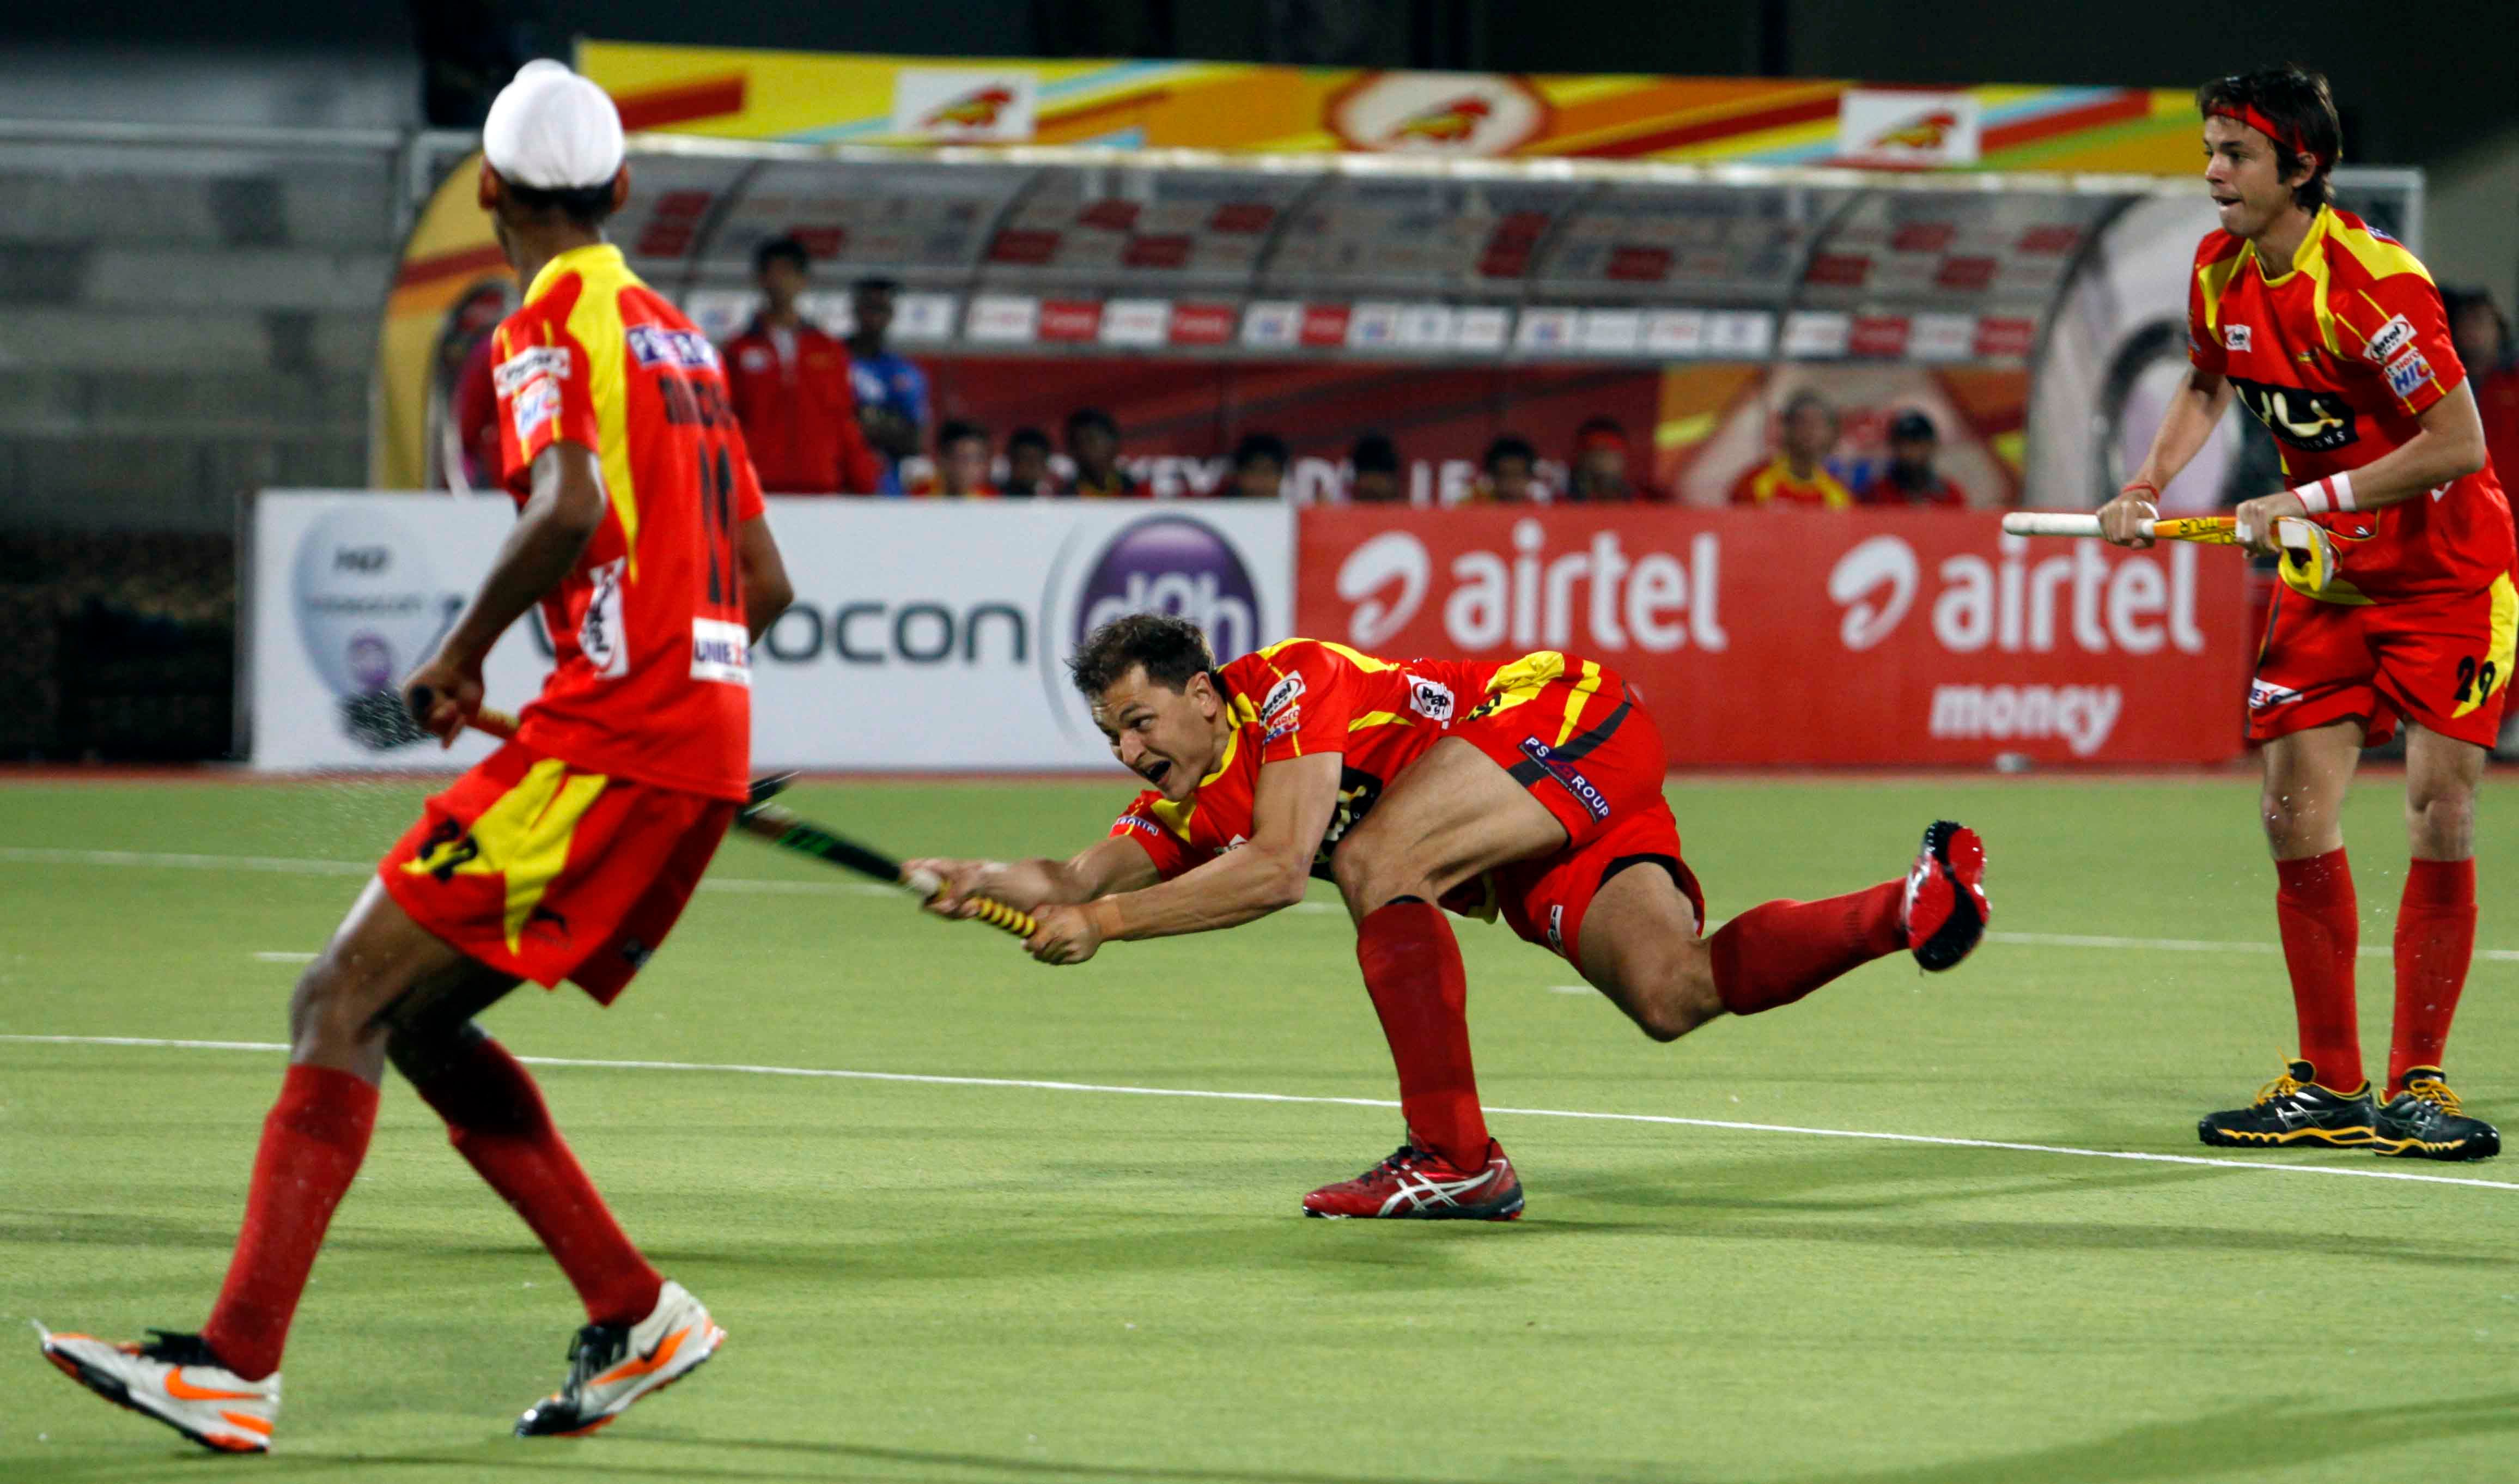 Justin Reid Ross scores the first goal for Ranchi Rhinos as they beat Punjab Warriors at Jalandhar 3-2 on 4th Feb 2013 in the Hero Hockey India League at Surjit Singh Hockey Stadium on Monday.